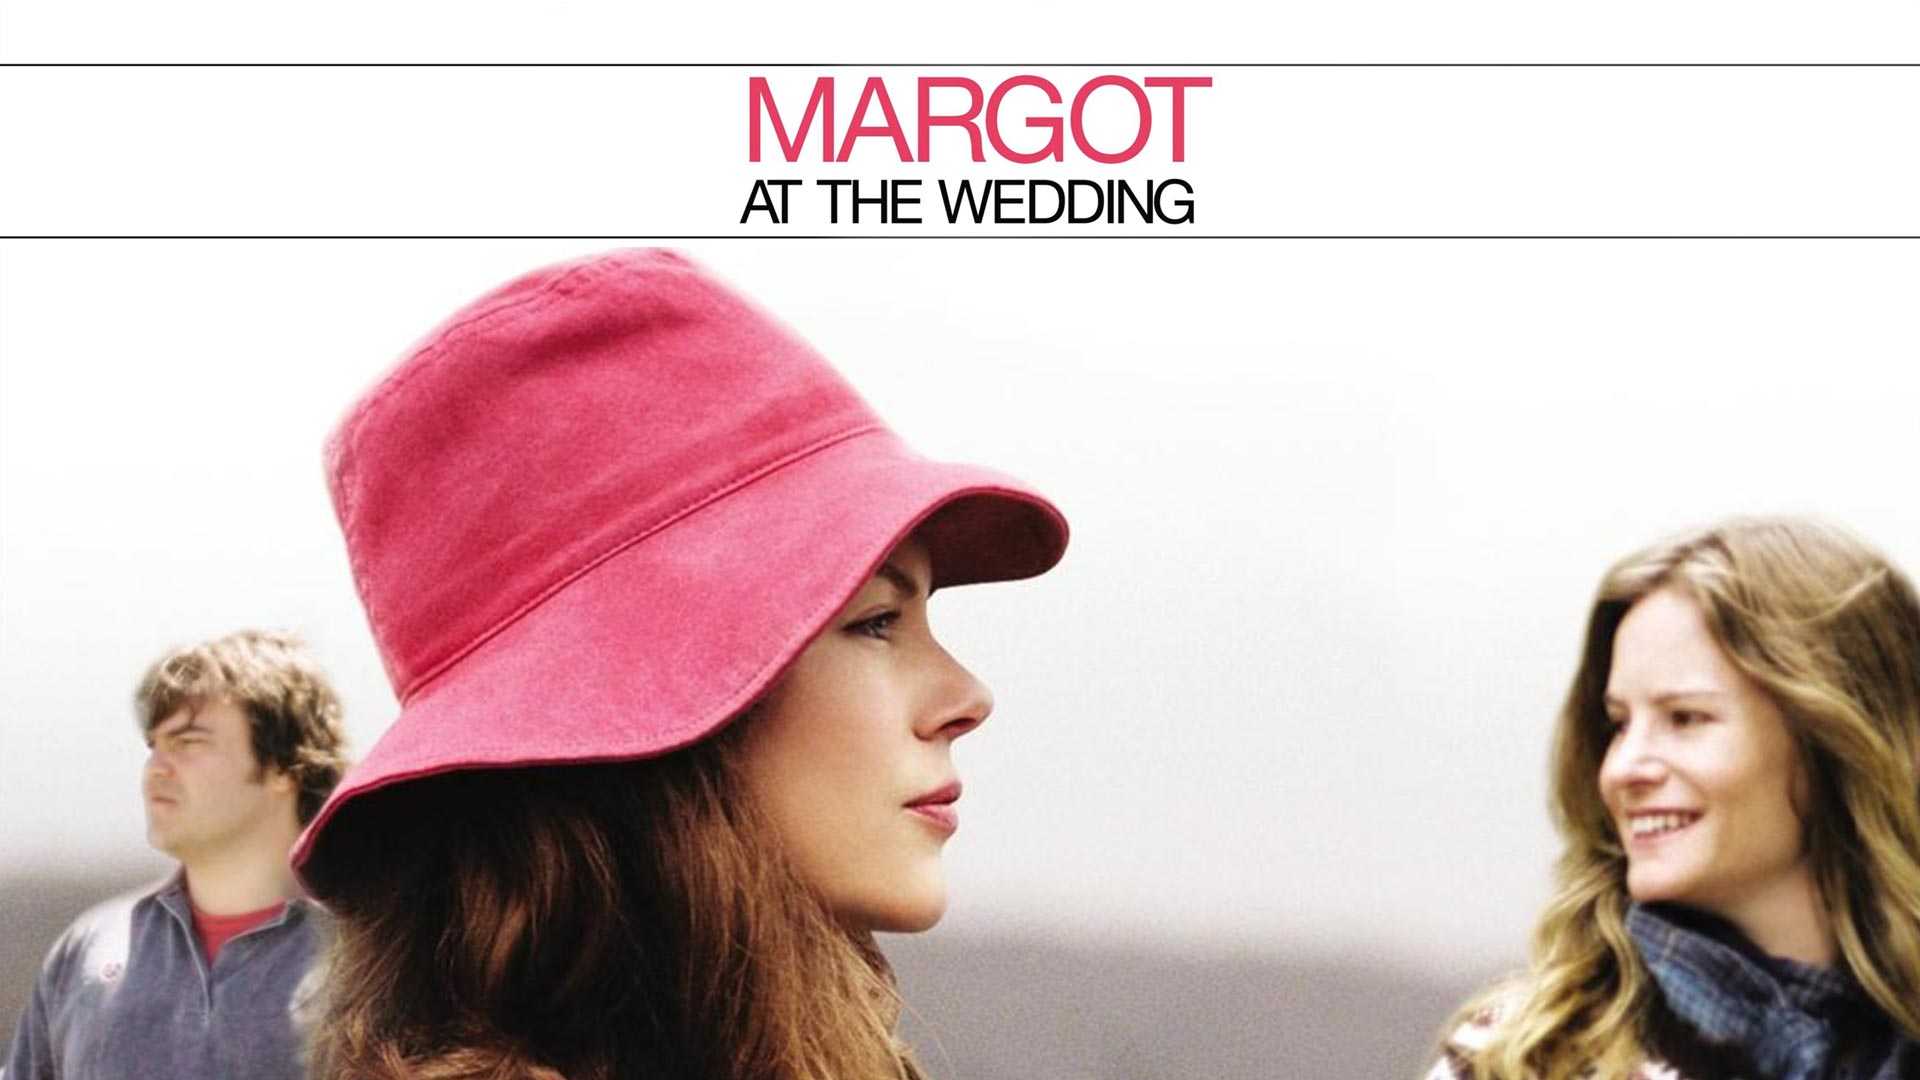 49-facts-about-the-movie-margot-at-the-wedding